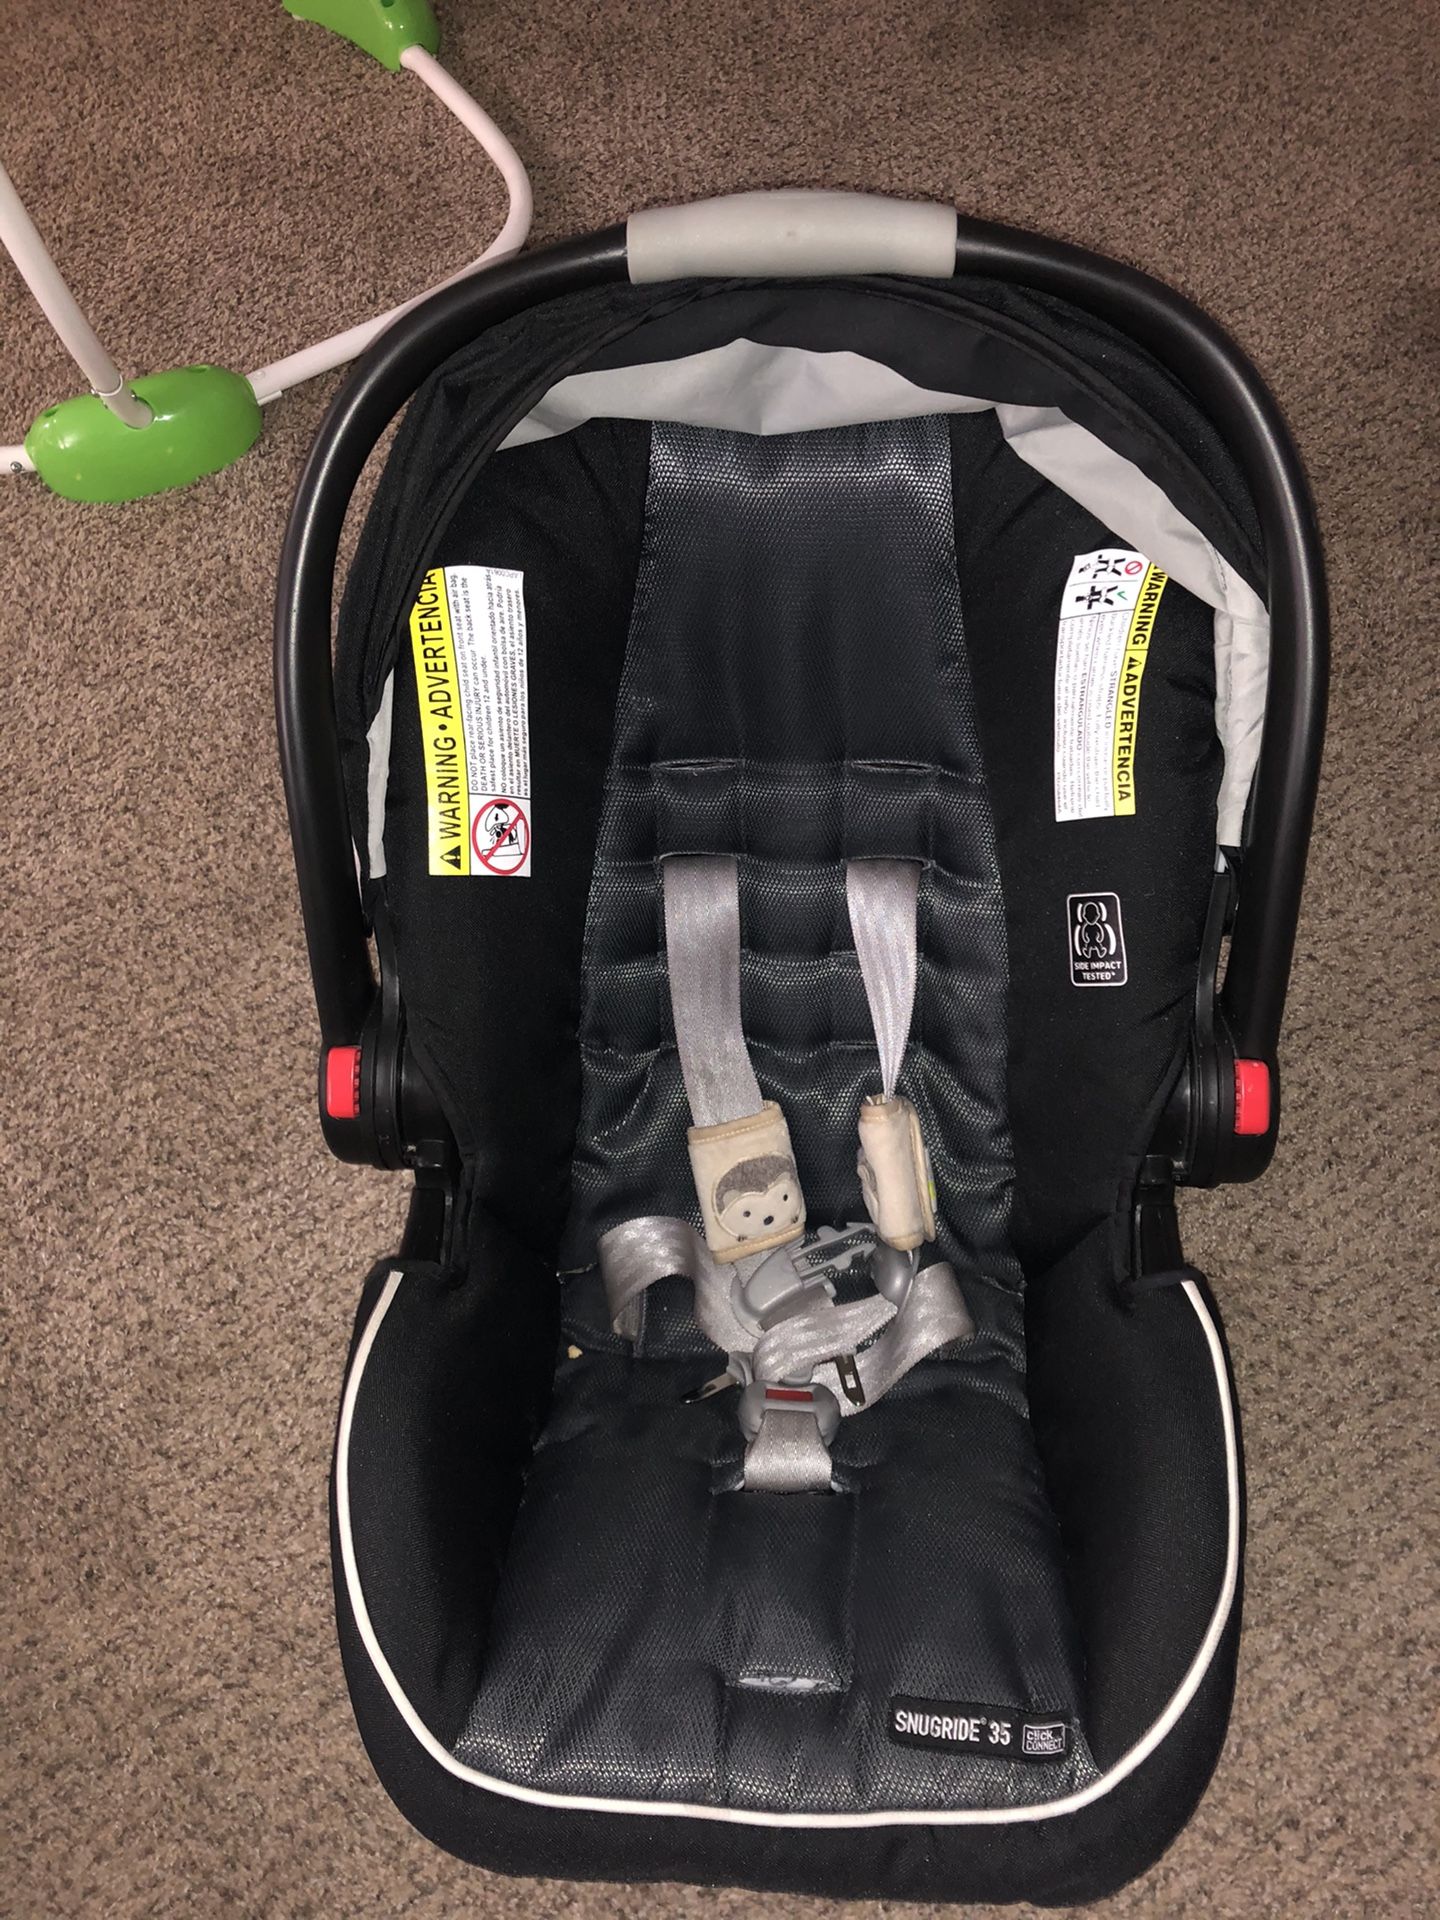 Graco Snugride 35 car seat and base